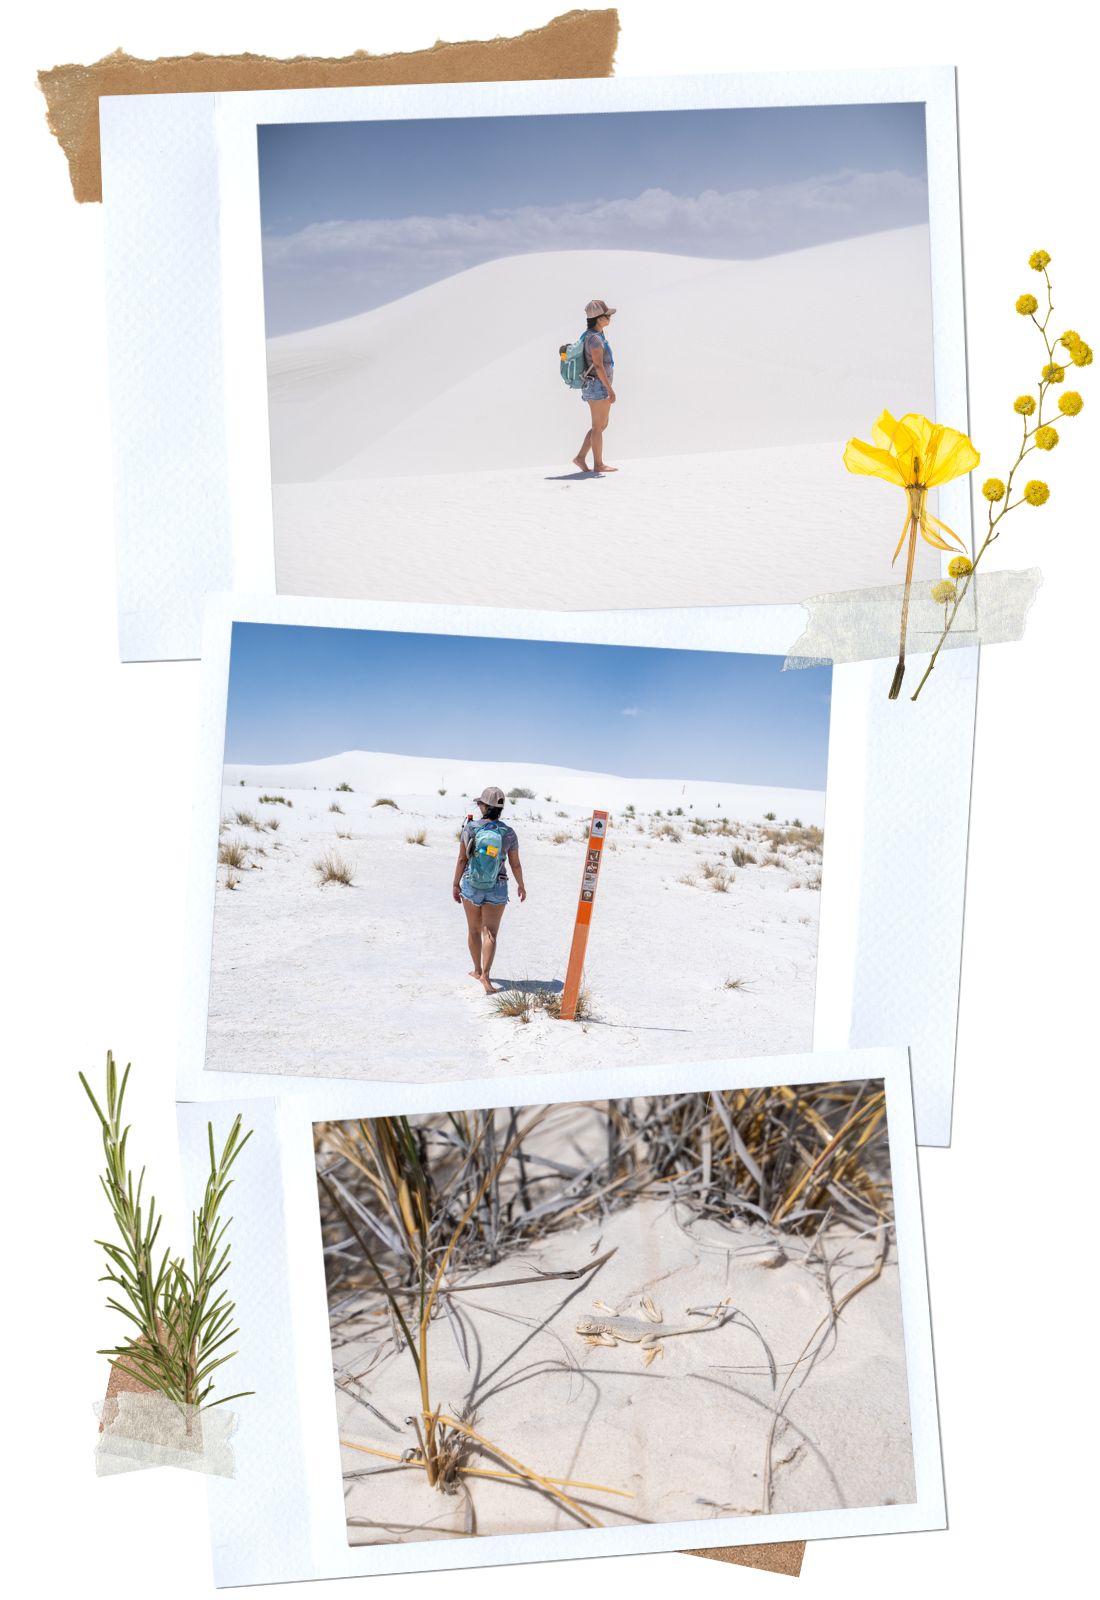 White Sands National Park in New Mexico: Backcountry Camping Trail